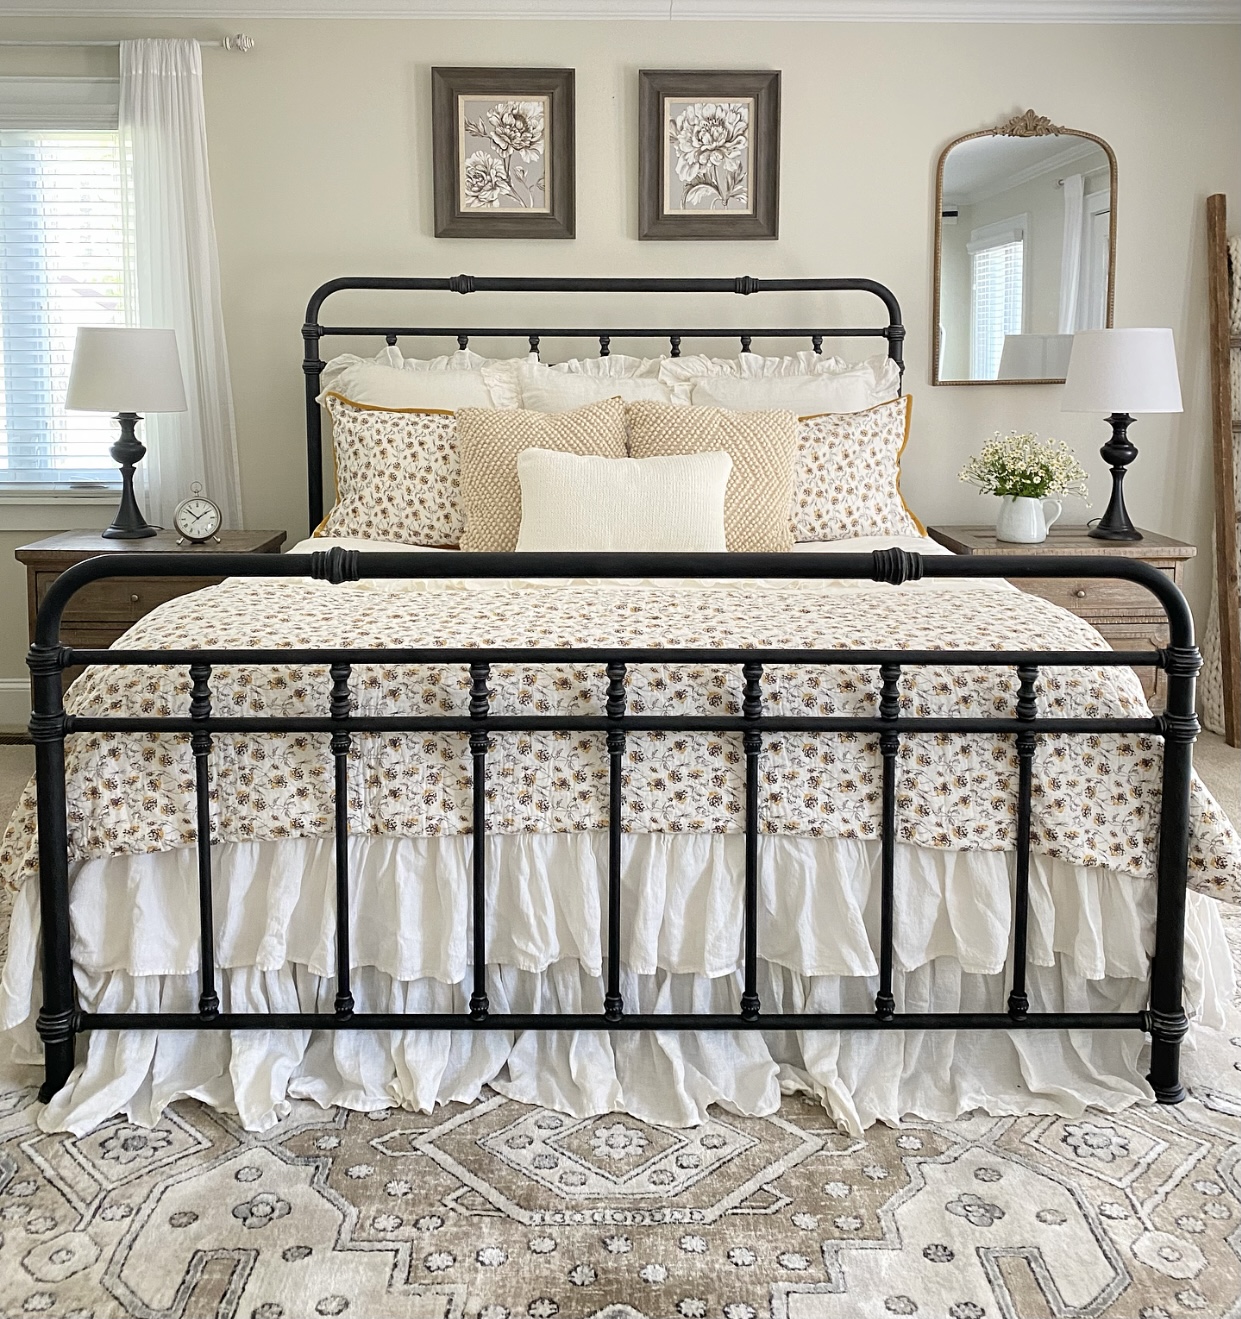 Late Summer Farmhouse Bedroom with black iron bed, a neutral color palette, and beautiful textures.